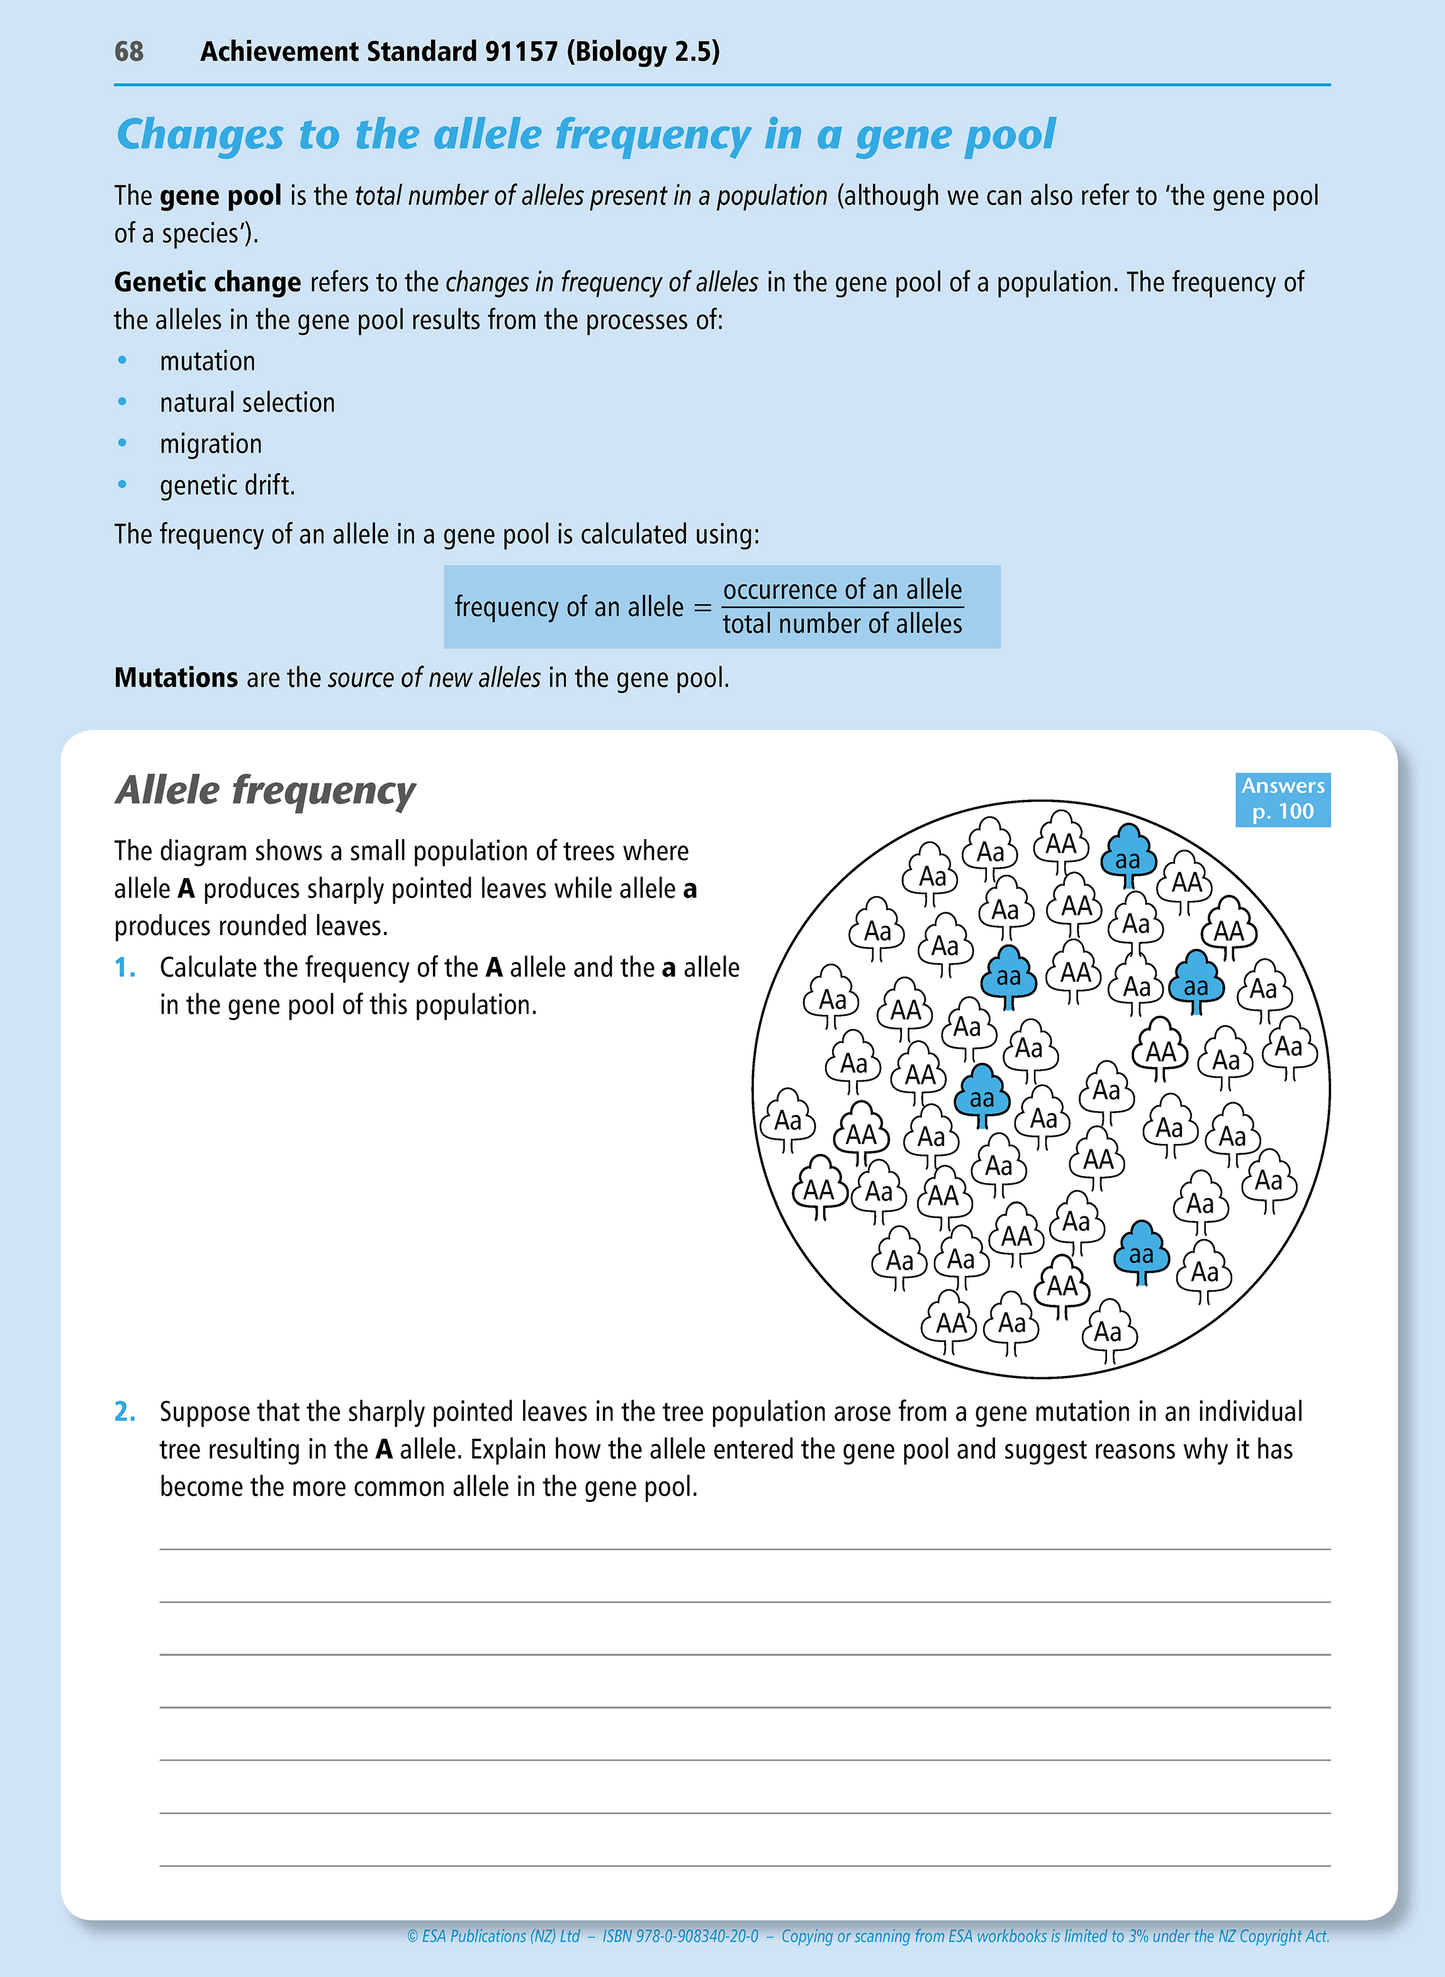 Level 2 Genetic Variation and Change 2.5 Learning Workbook